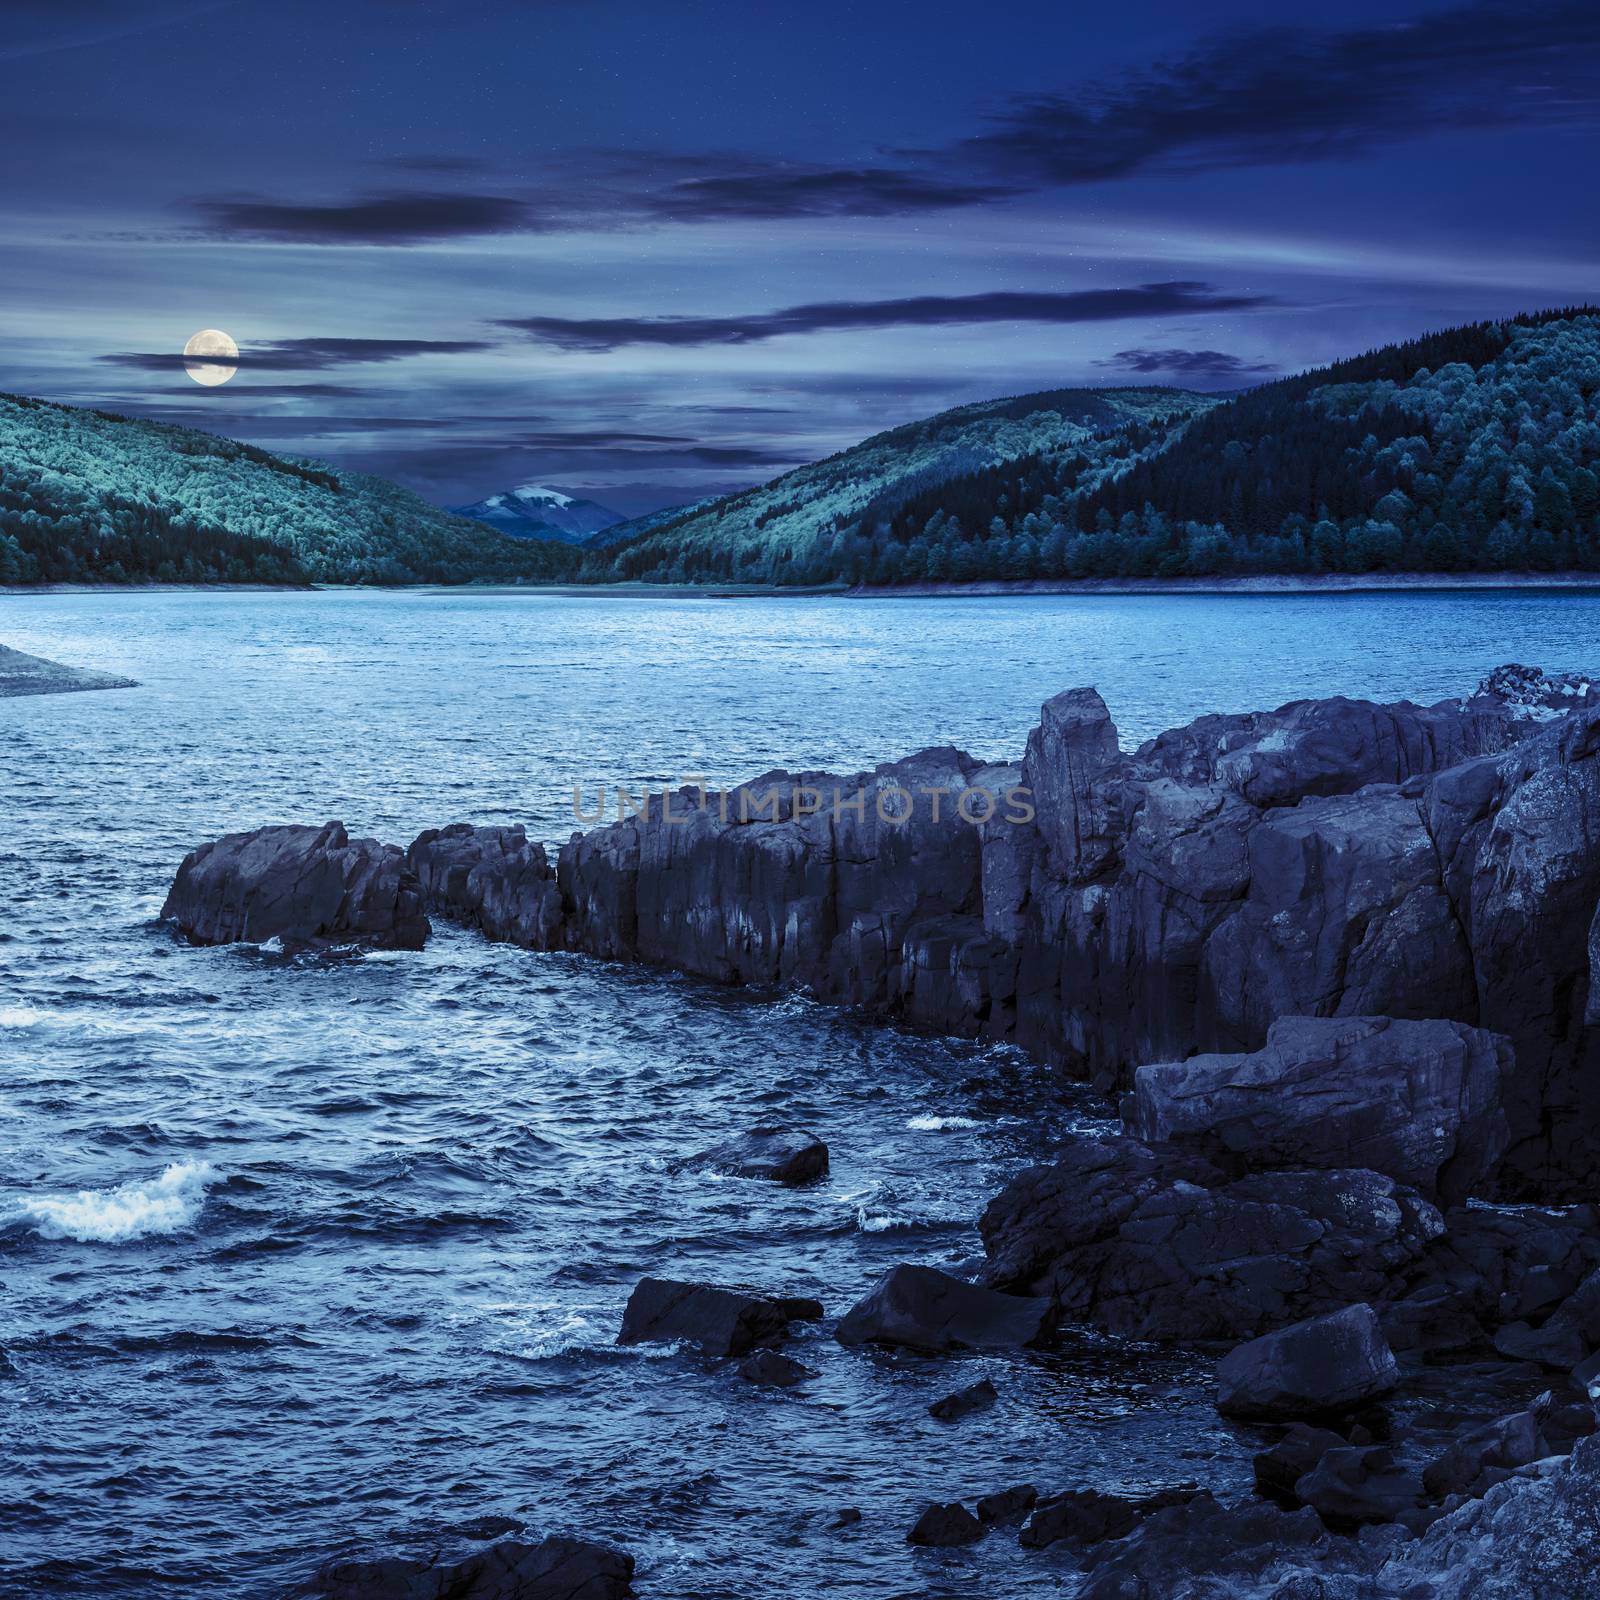 composite image of summer landscape  on lake with rocky shore and some boulders near forest in mountain  with high peak far away at night in full moon light